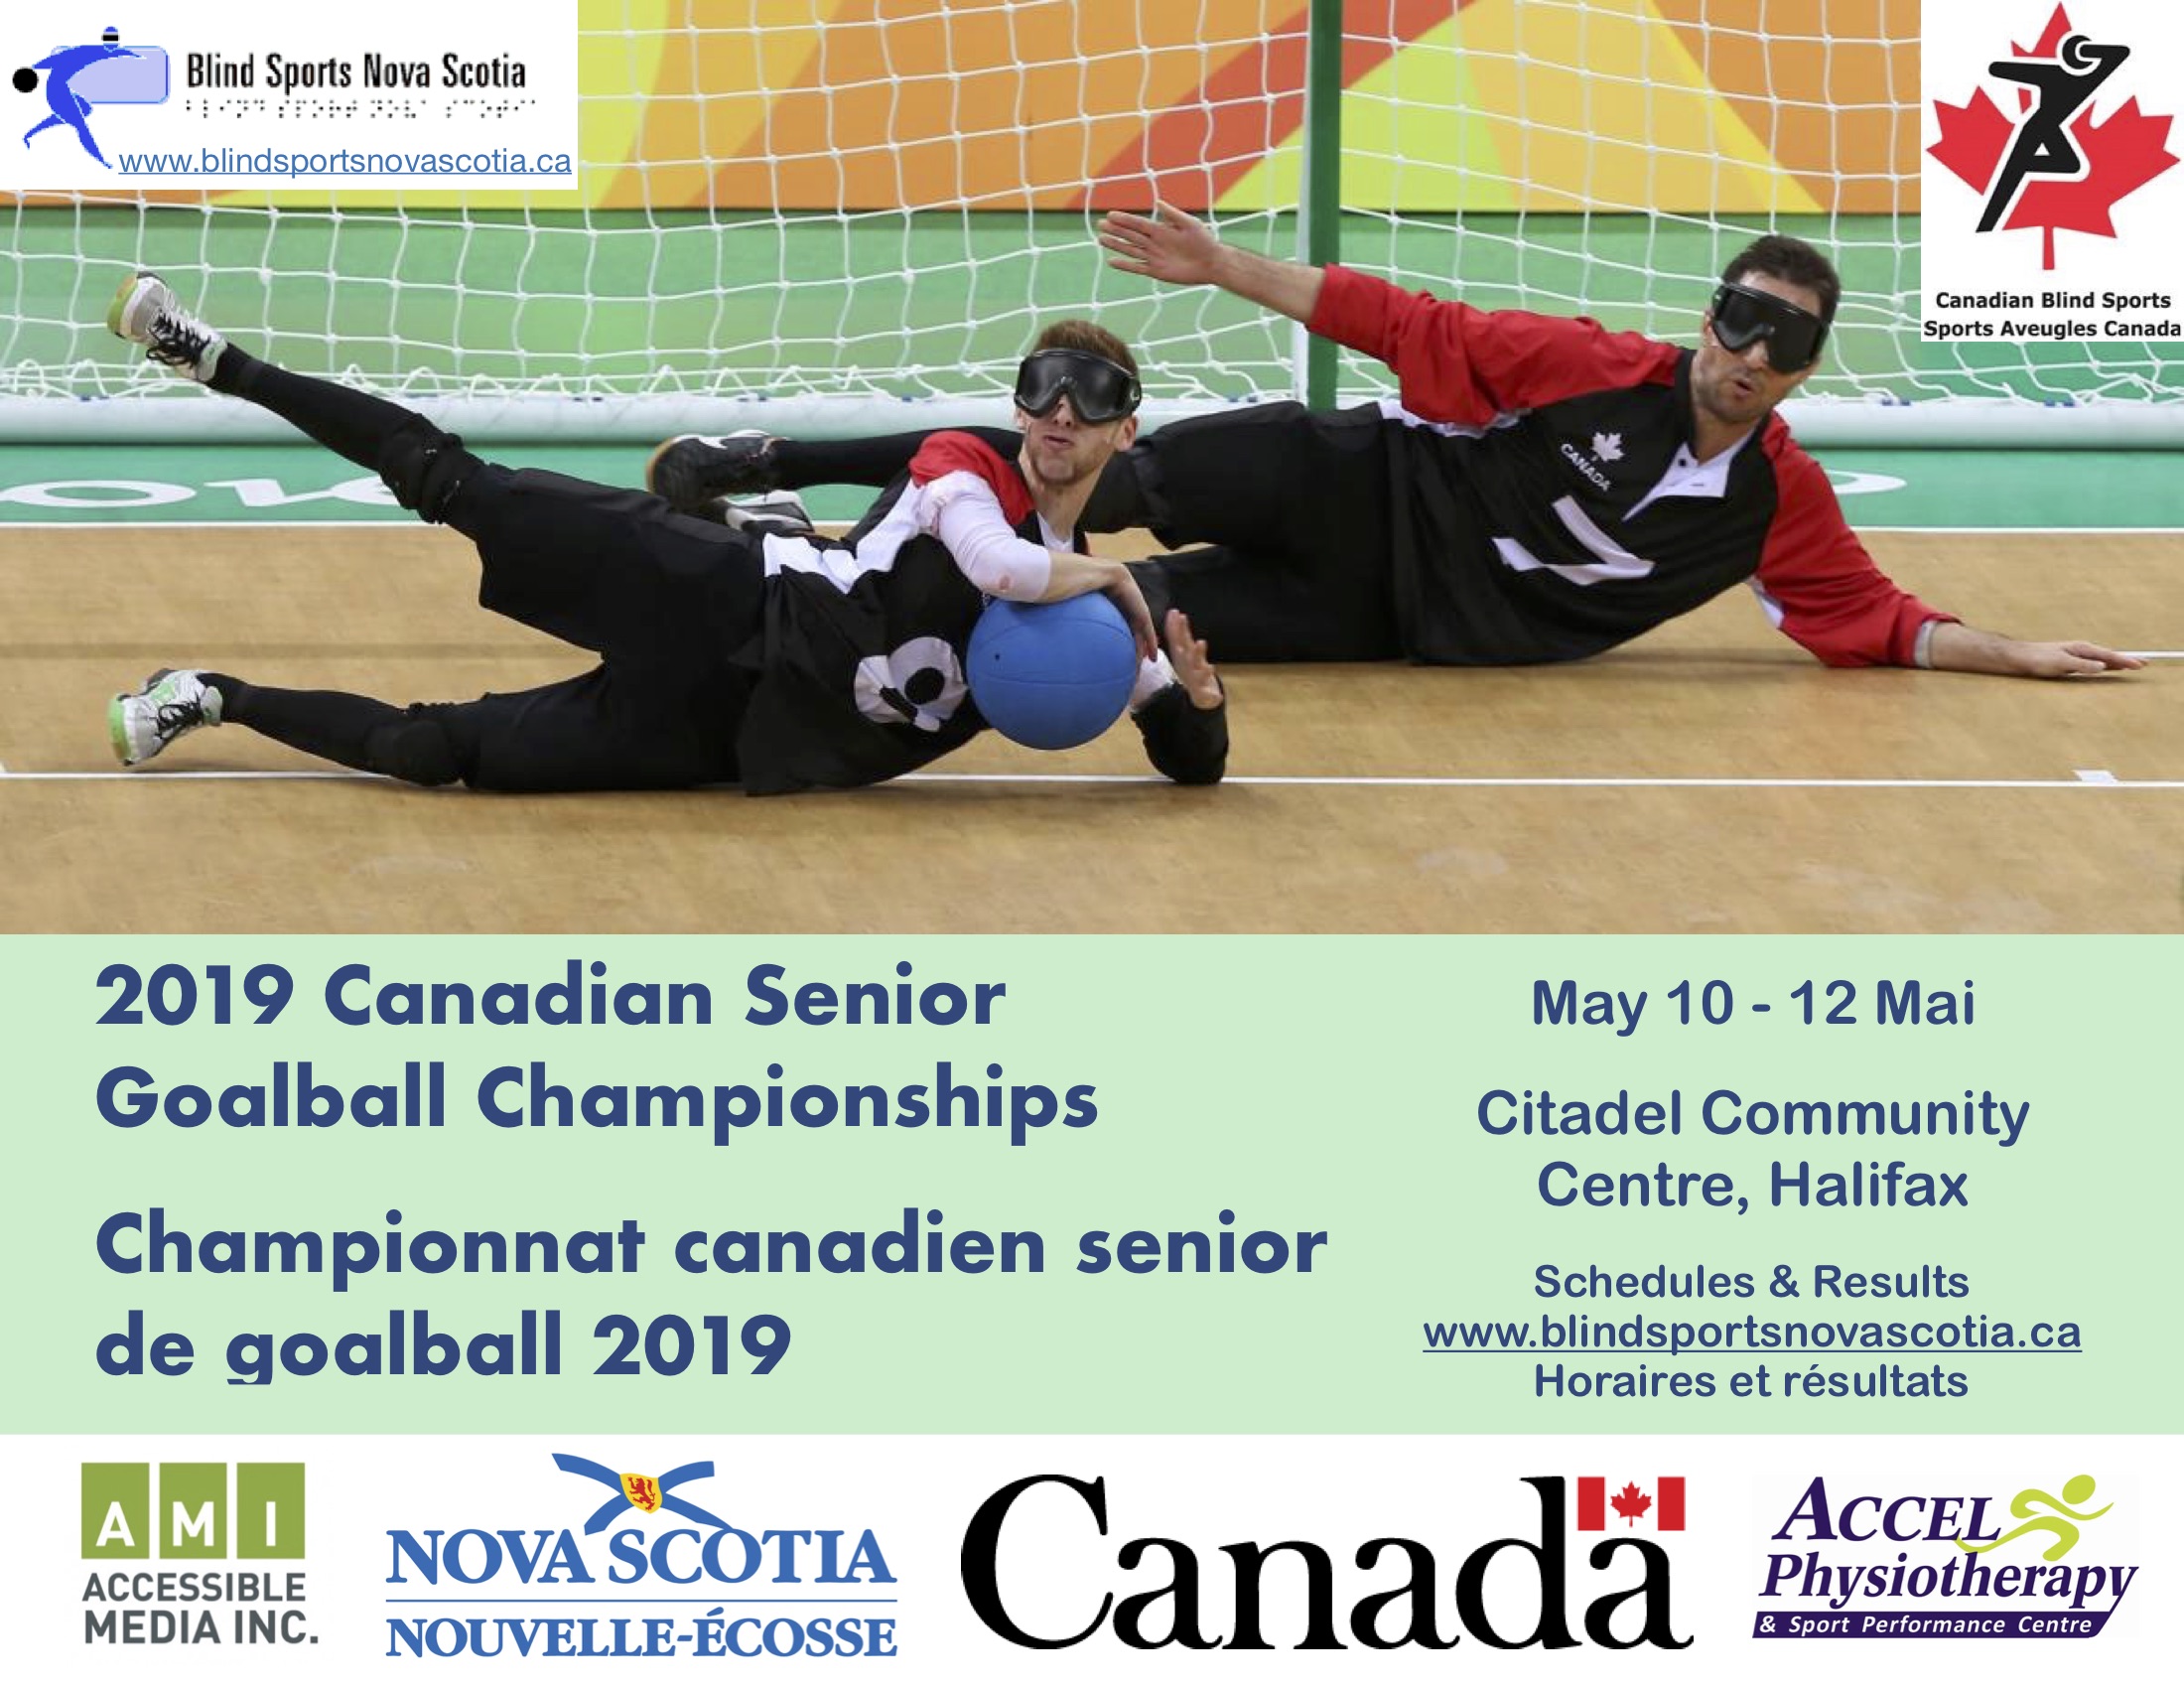 Poster Description: Two male players mid slide in front of a goalball net on a goal ball court. The athlete in front has a blue goalball nest in his arms. They are wearing blackout eyeshades. The poster reads 2019 Canadian Senior Goalball Championships / Championnat canadien senior de goalball 2019. Host & sponsor logos include Canadian Blind Sports / Sport Aveugles Canada; Blind Sports Nova Scotia www.blindsportsnovascotia.ca; AMI Accessible Media Inc.; Nova Scotia / Nouvelle-Ecosse; Accel Physiotherapy & Sport Performance; Government of Canada